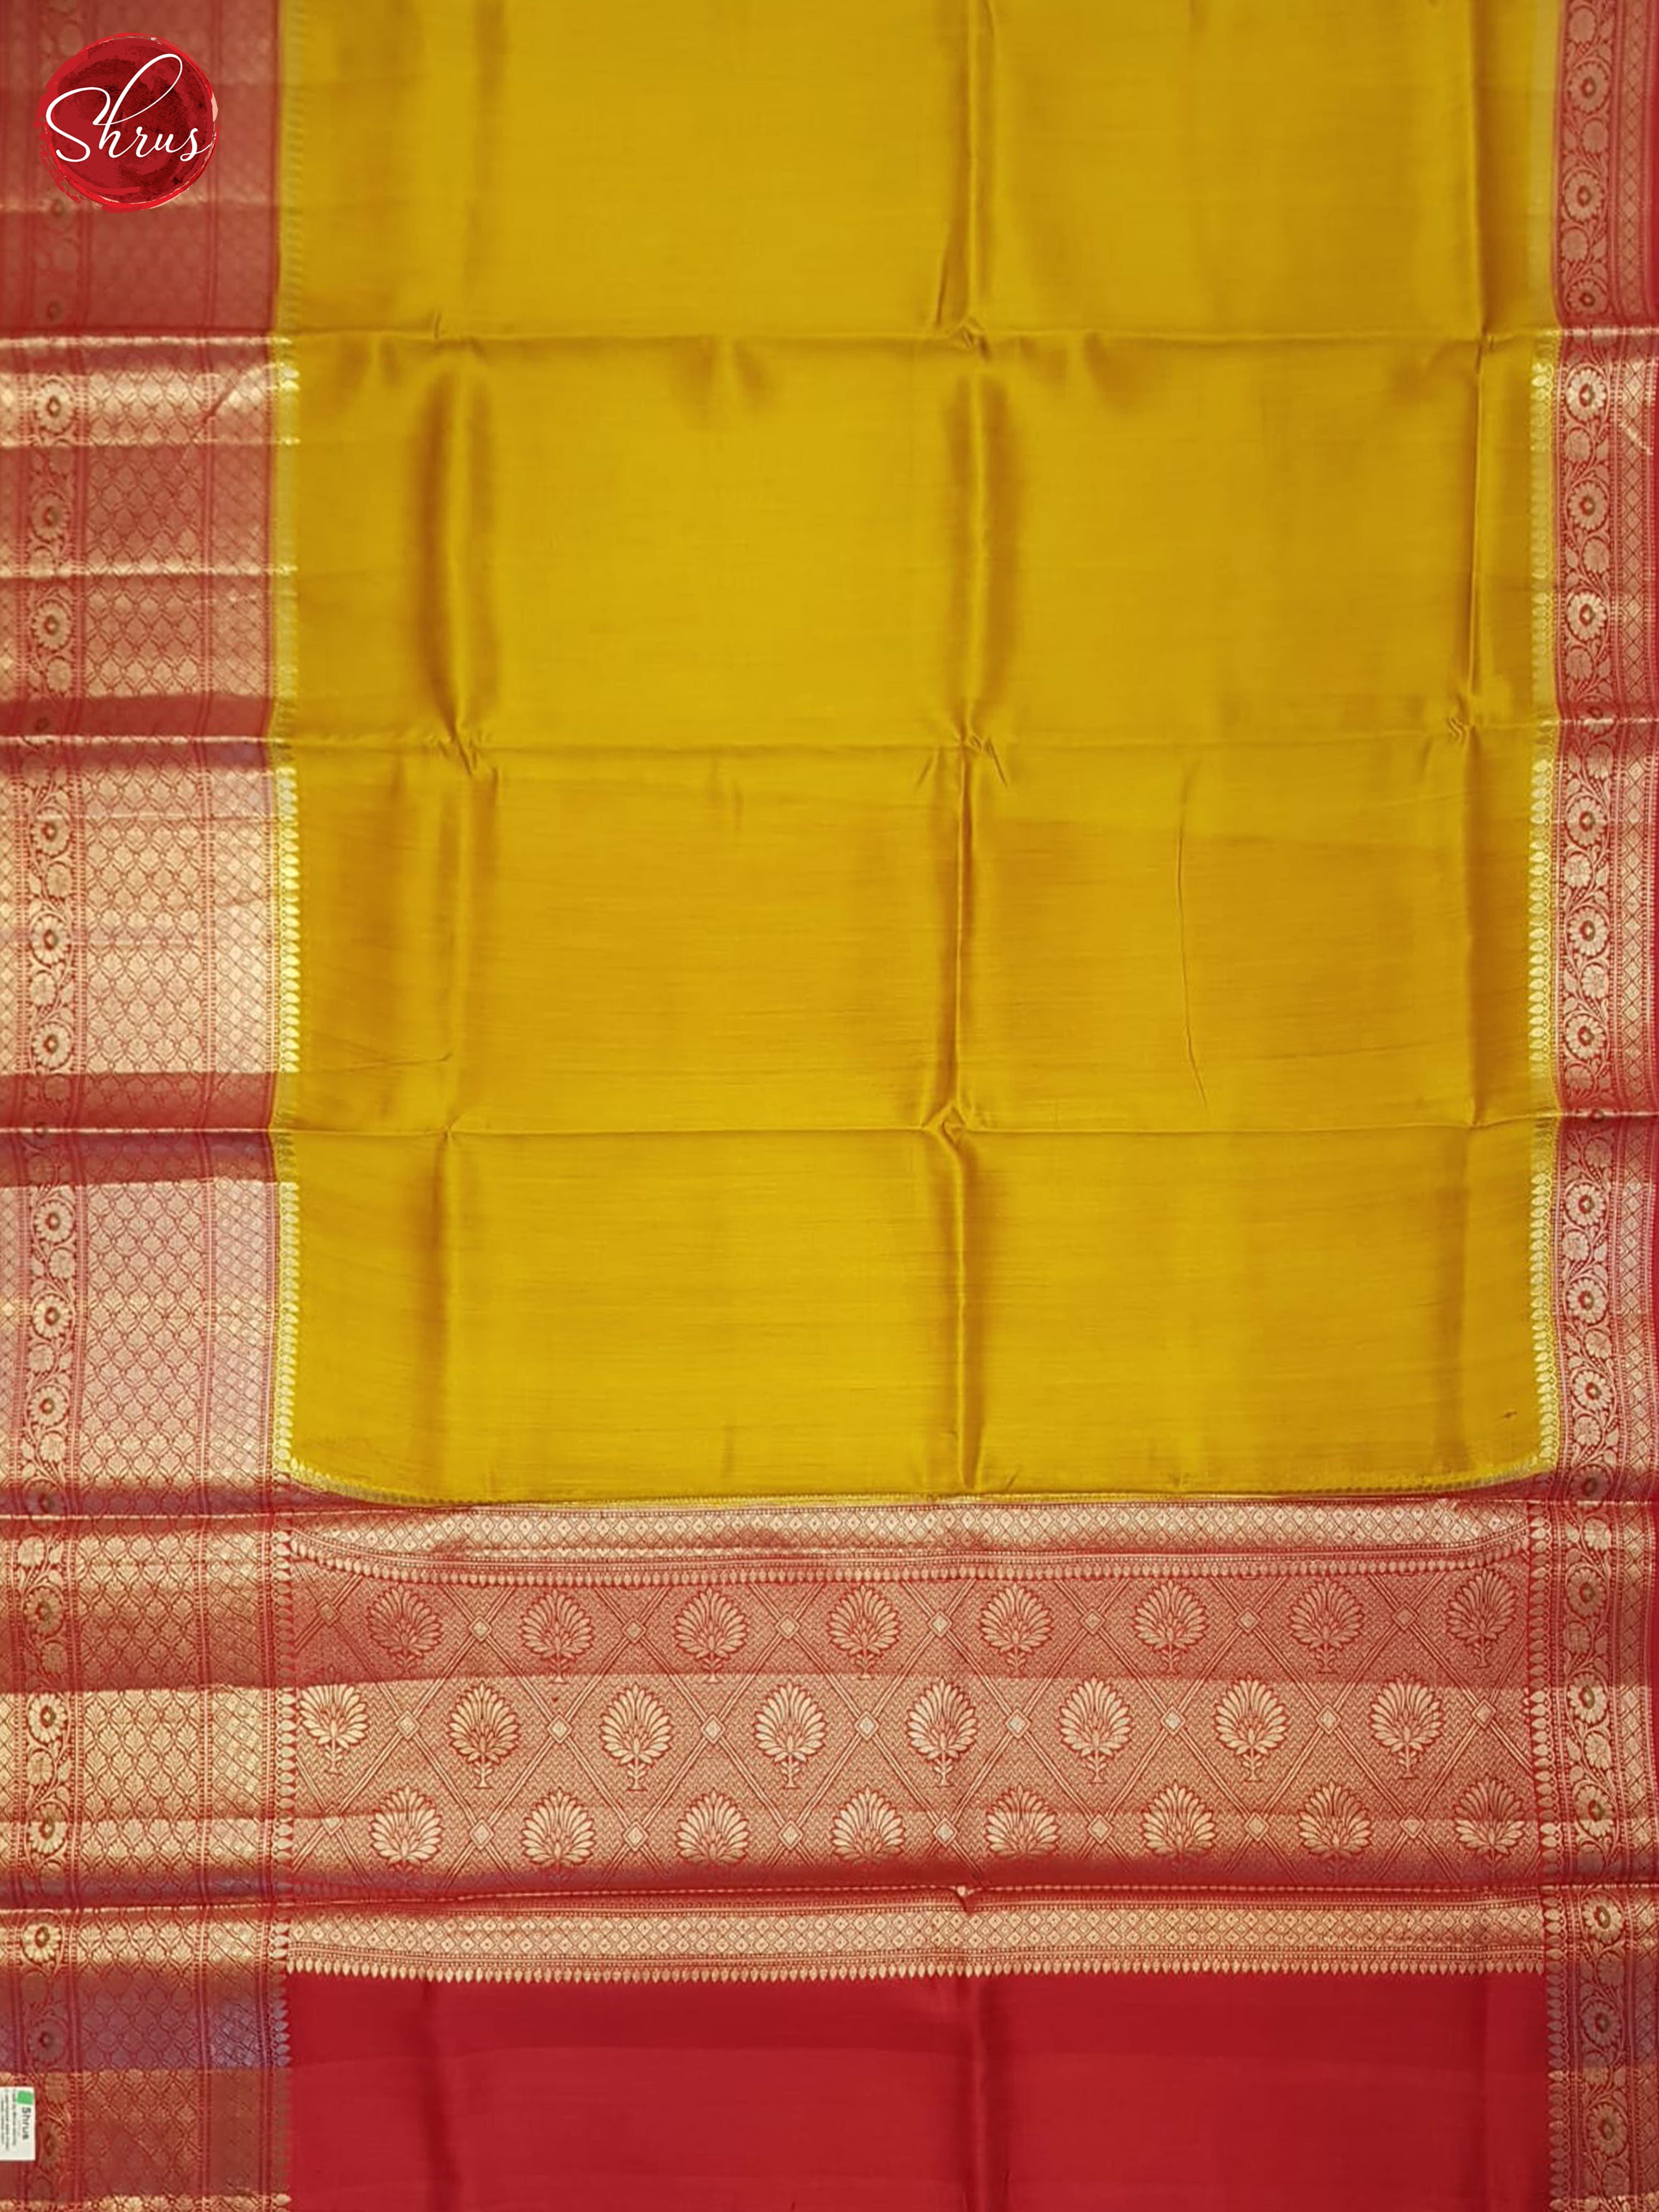 Mustard And Red-Tussar Saree - Shop on ShrusEternity.com